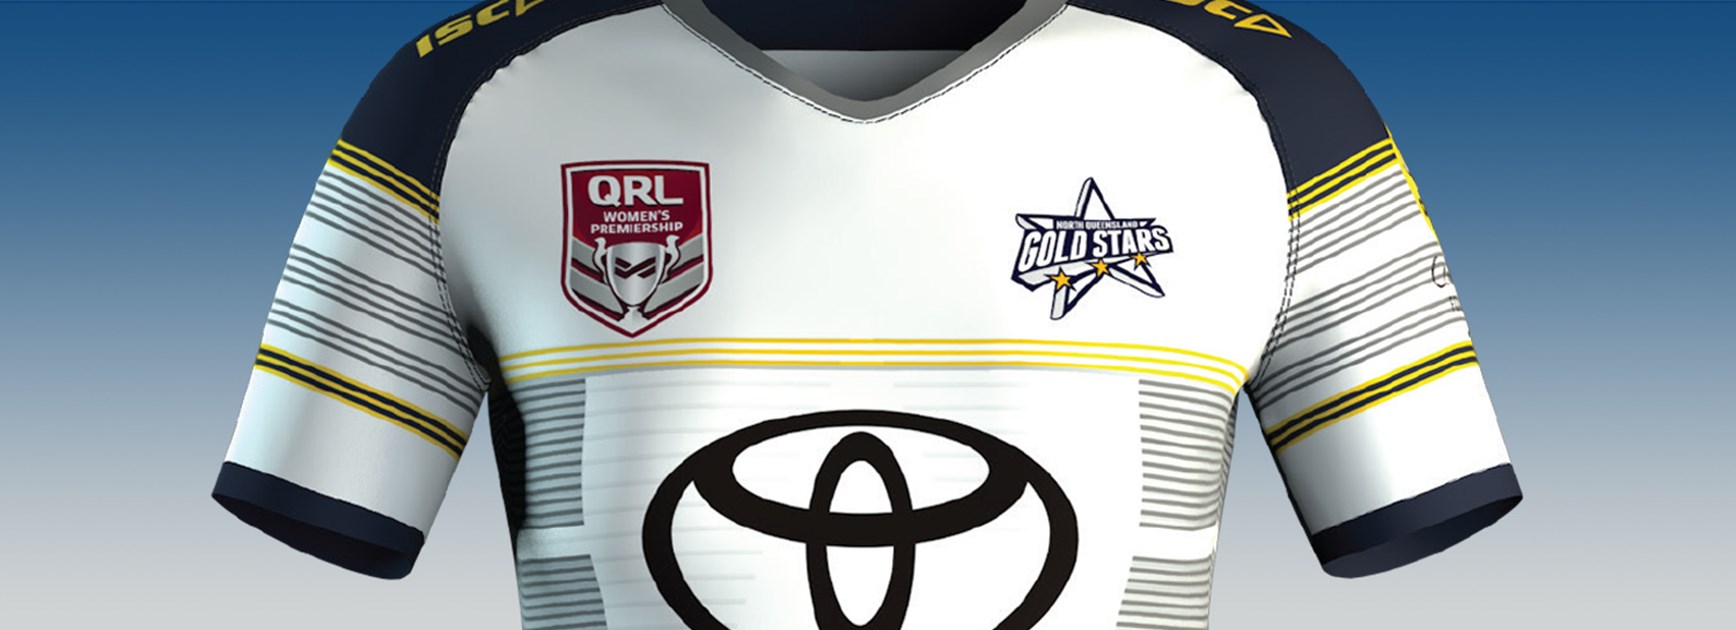 New elite outfit for North Queensland Toyota Gold Stars